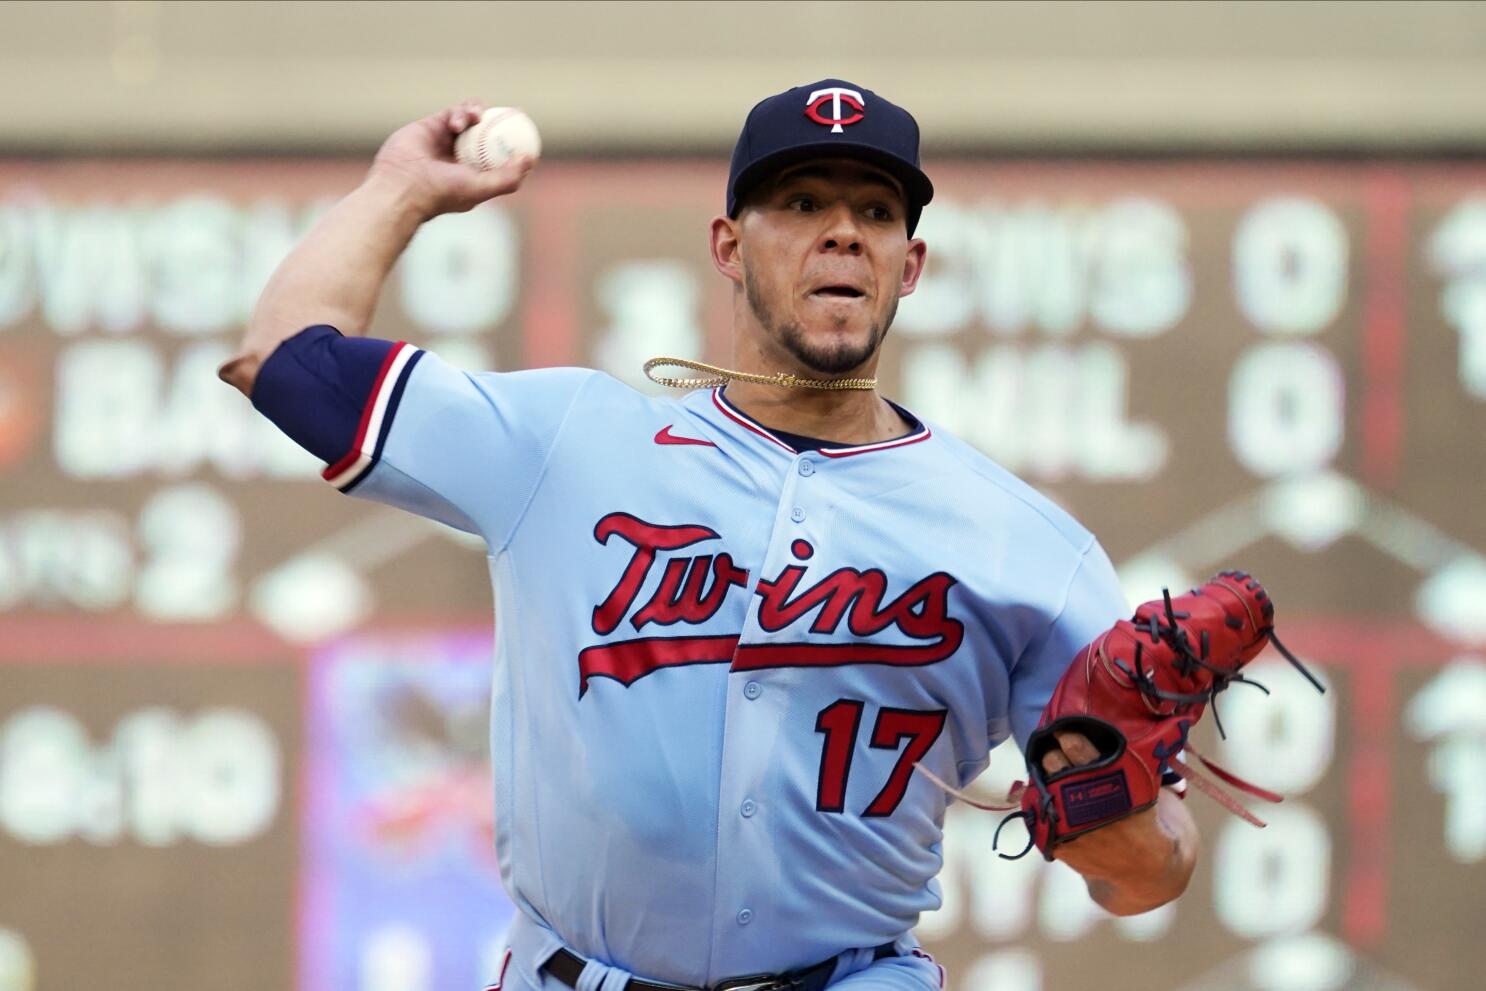 Blue Jays vs. Twins series preview: Berrios' old team battling injuries,  COVID